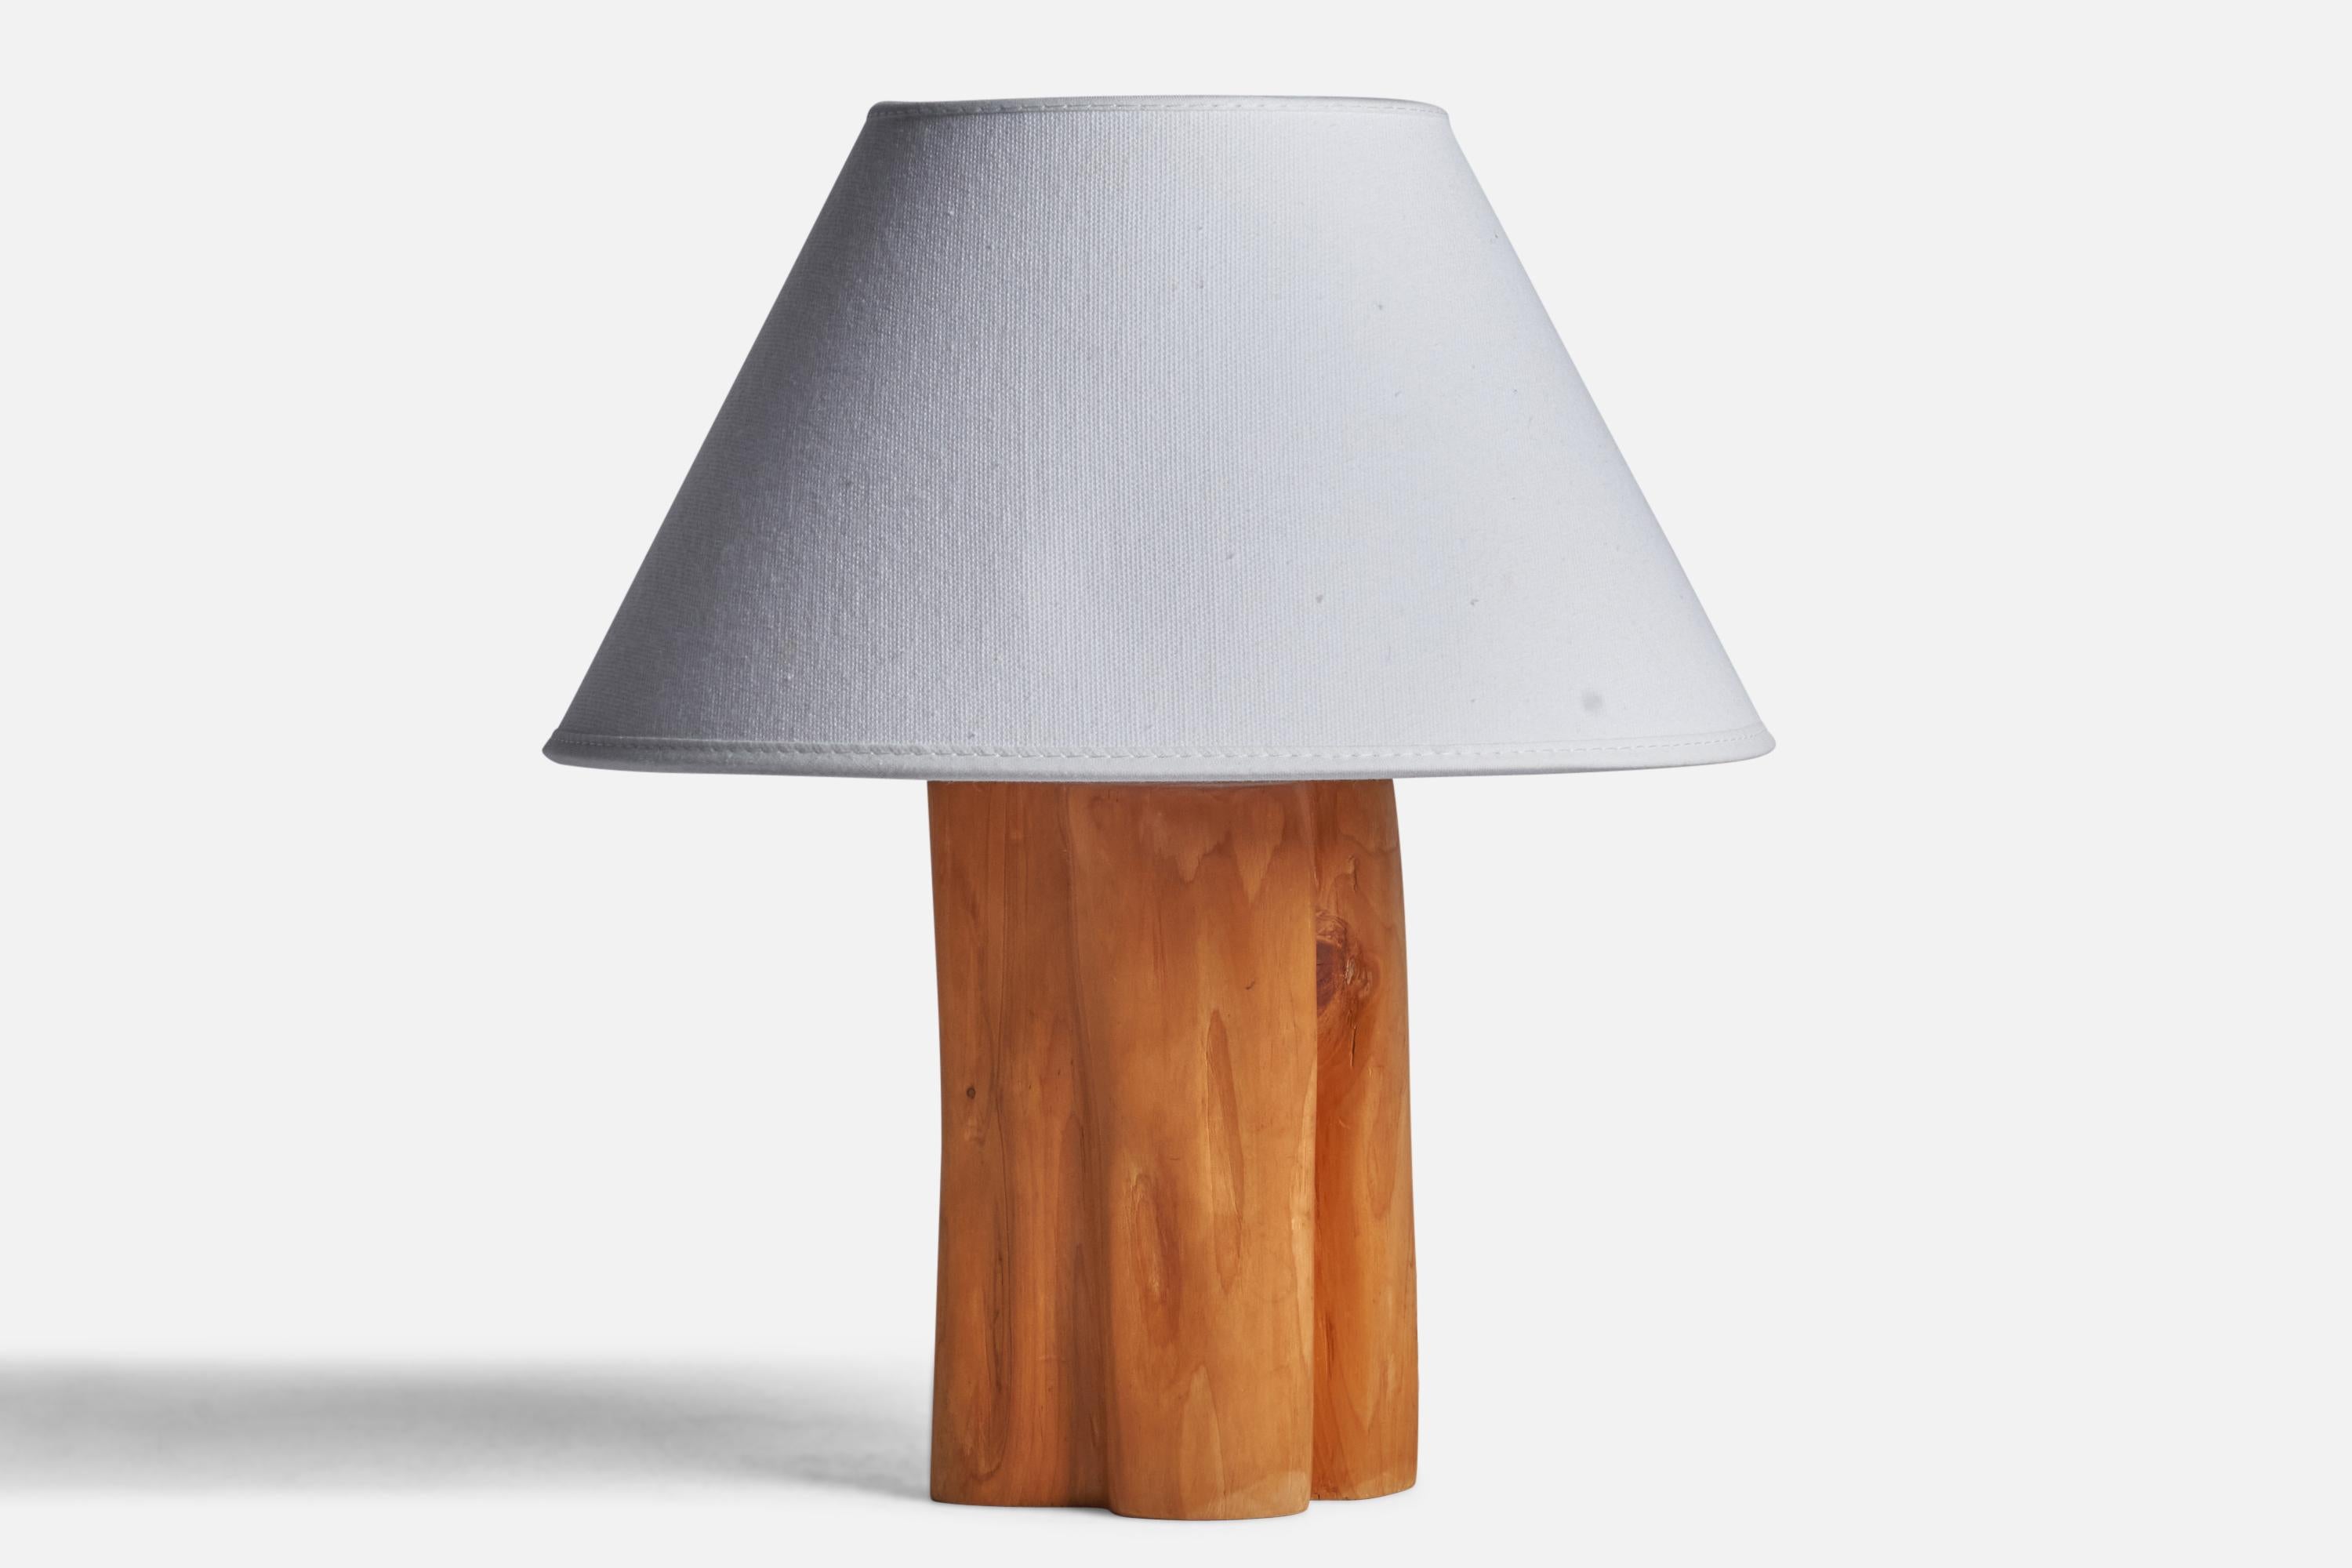 A freeform wood table lamp designed and produced in Sweden, 1971.

Dimensions of Lamp (inches): 8.5” H x 3.5” W x 3.75” D
Dimensions of Shade (inches): 4.5” Top Diameter x 9.75” Bottom Diameter x 5.8” H
Dimensions of Lamp with Shade (inches): 11.5”